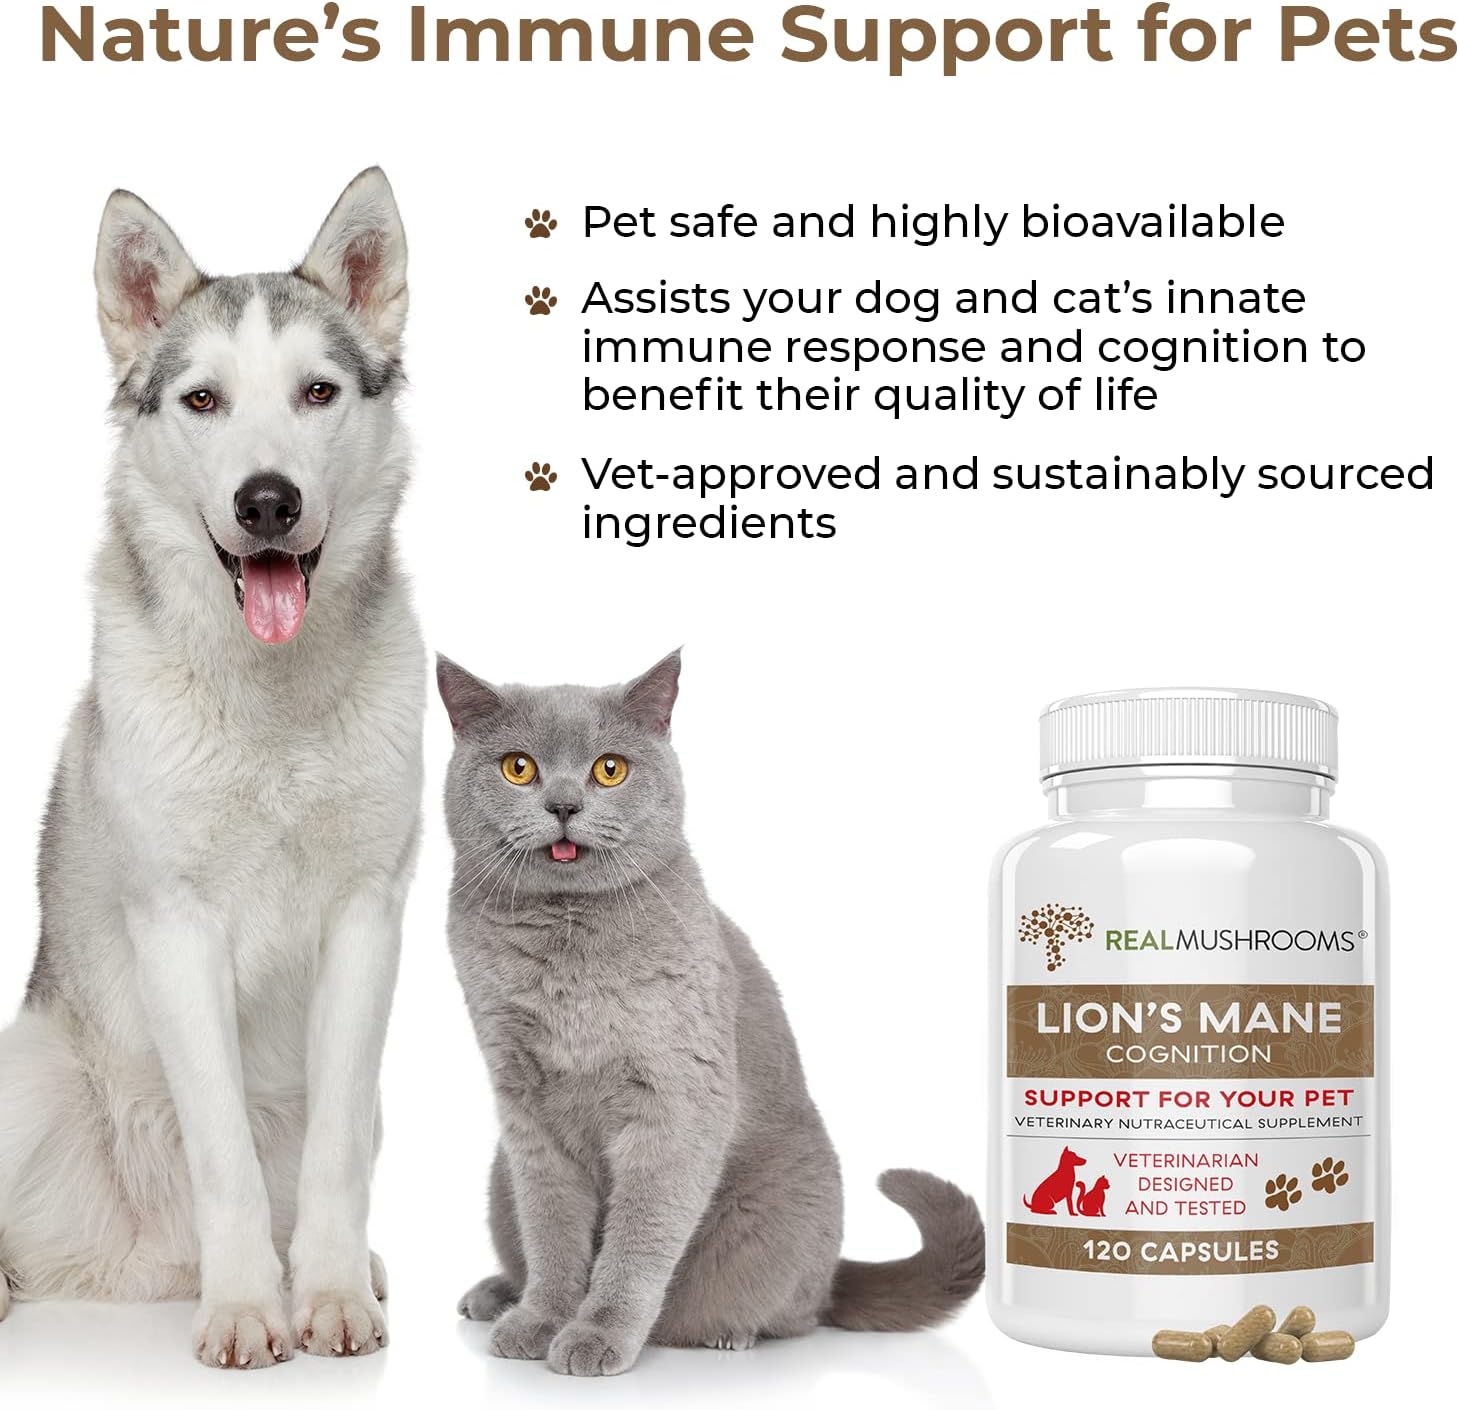 Real Mushrooms Lions Mane Pet Support Mushroom Supplement - Cat & Dog Vitamins and Supplements for Cognition & Memory Support - Vet Approved Mushroom Complex Capsules (120ct) Gluten-Free, Non-GMO : Pet Supplies